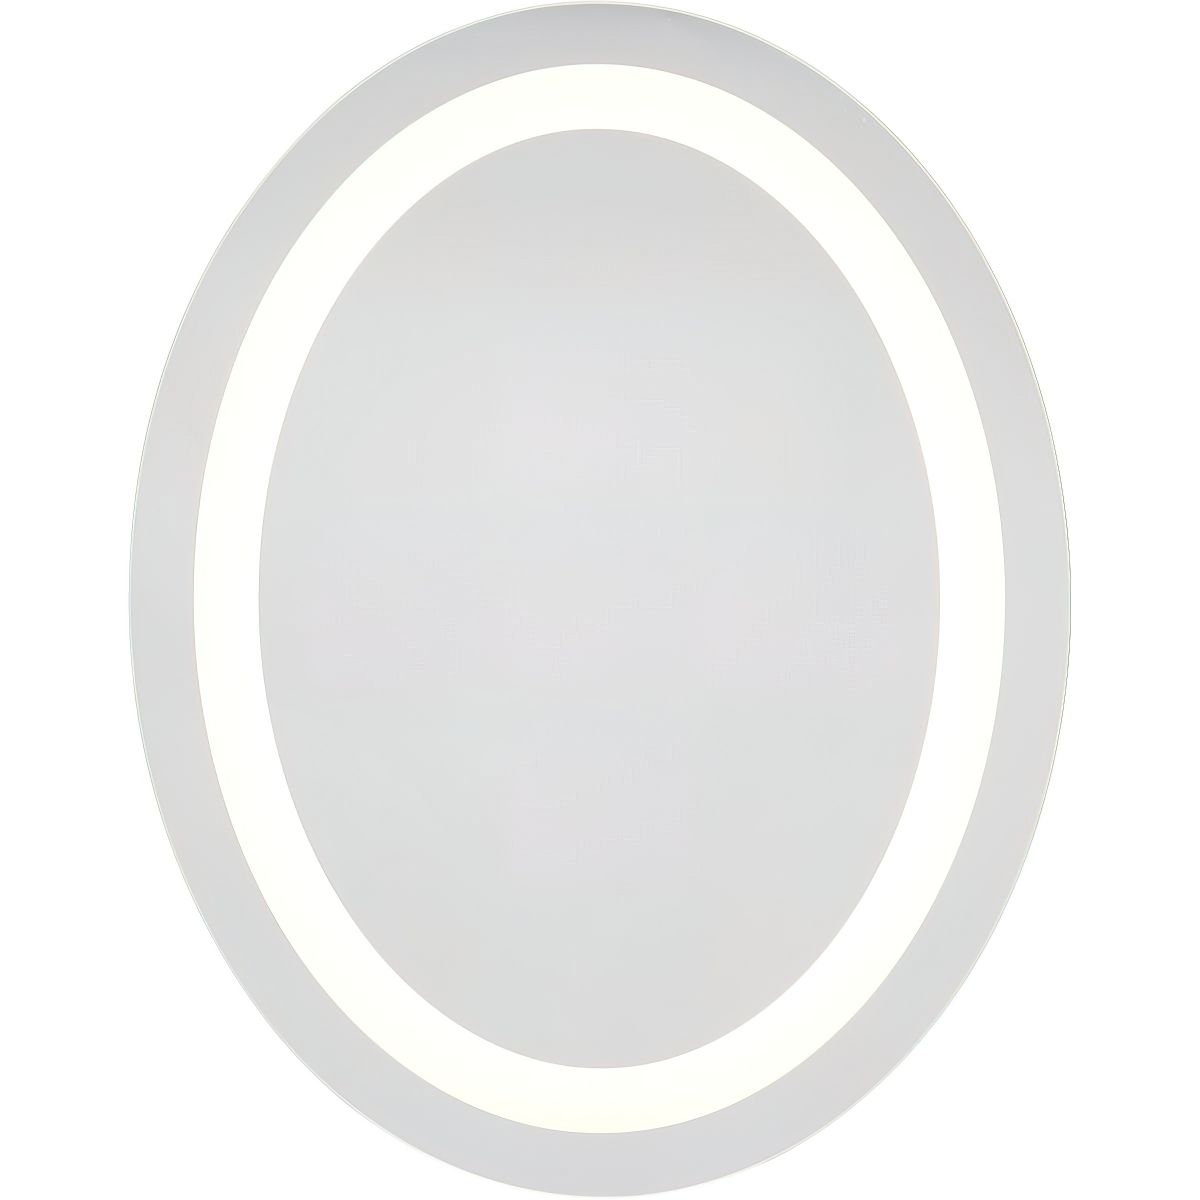 Captarent 22 In. X 28 In. White LED Wall Mirror